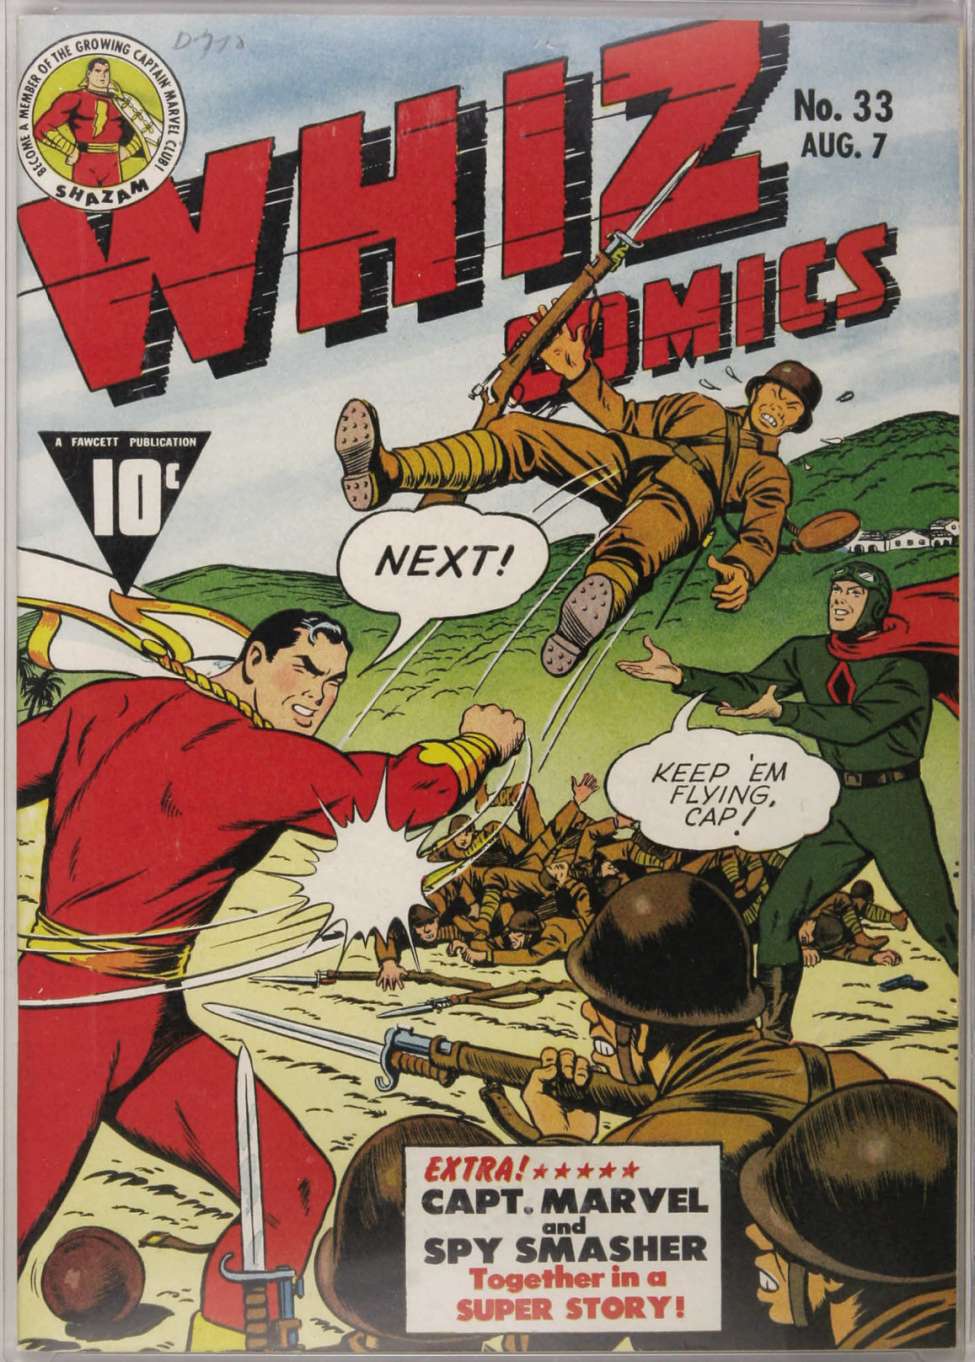 Book Cover For Whiz Comics 33